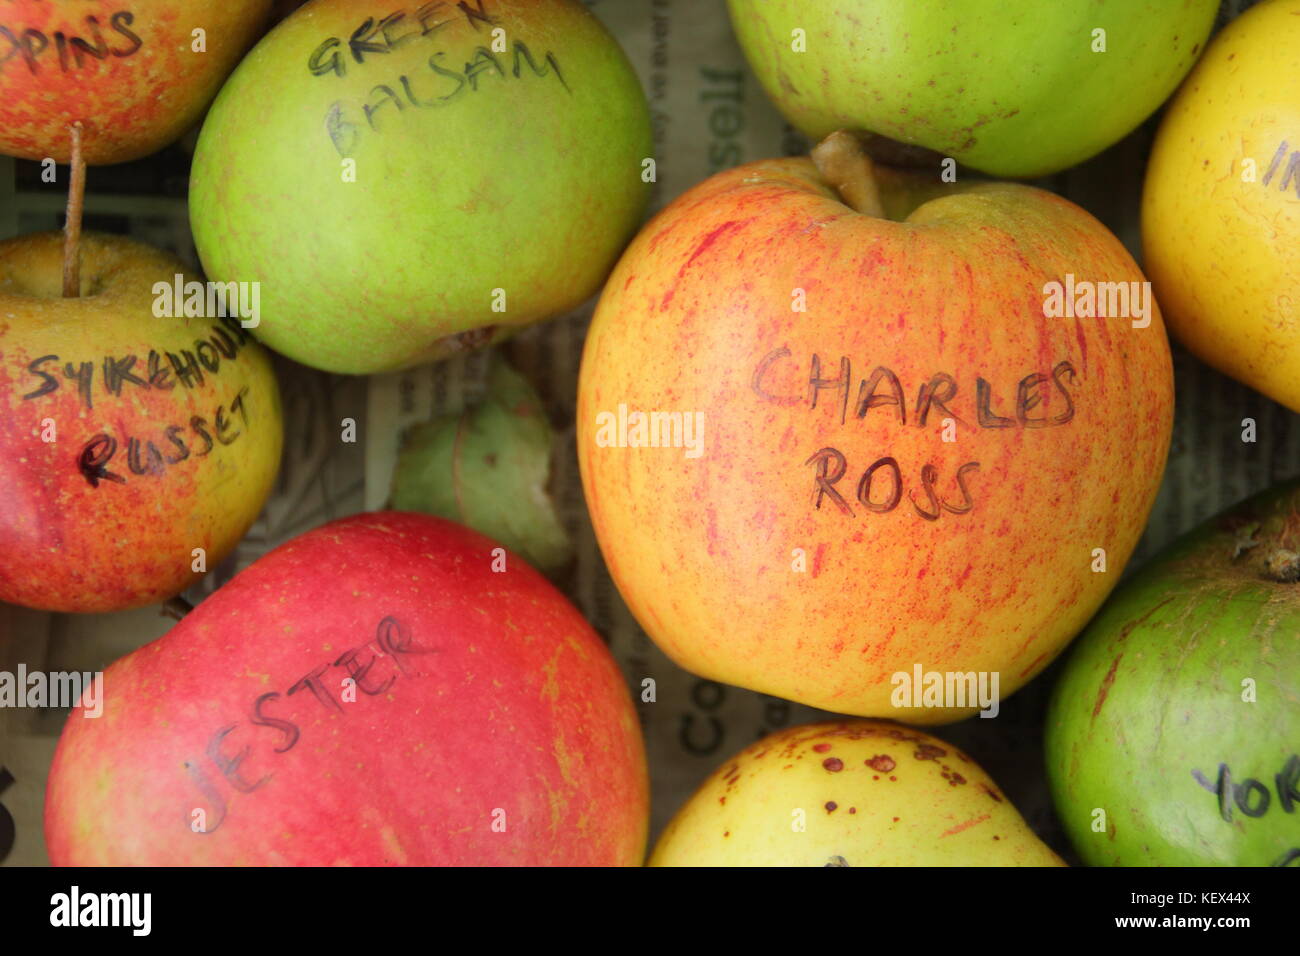 English apple varieties (malus domestica) including the handsome classic, Charles Ross and rare Sykehouse Russet, displayed at Apple Day celebration Stock Photo